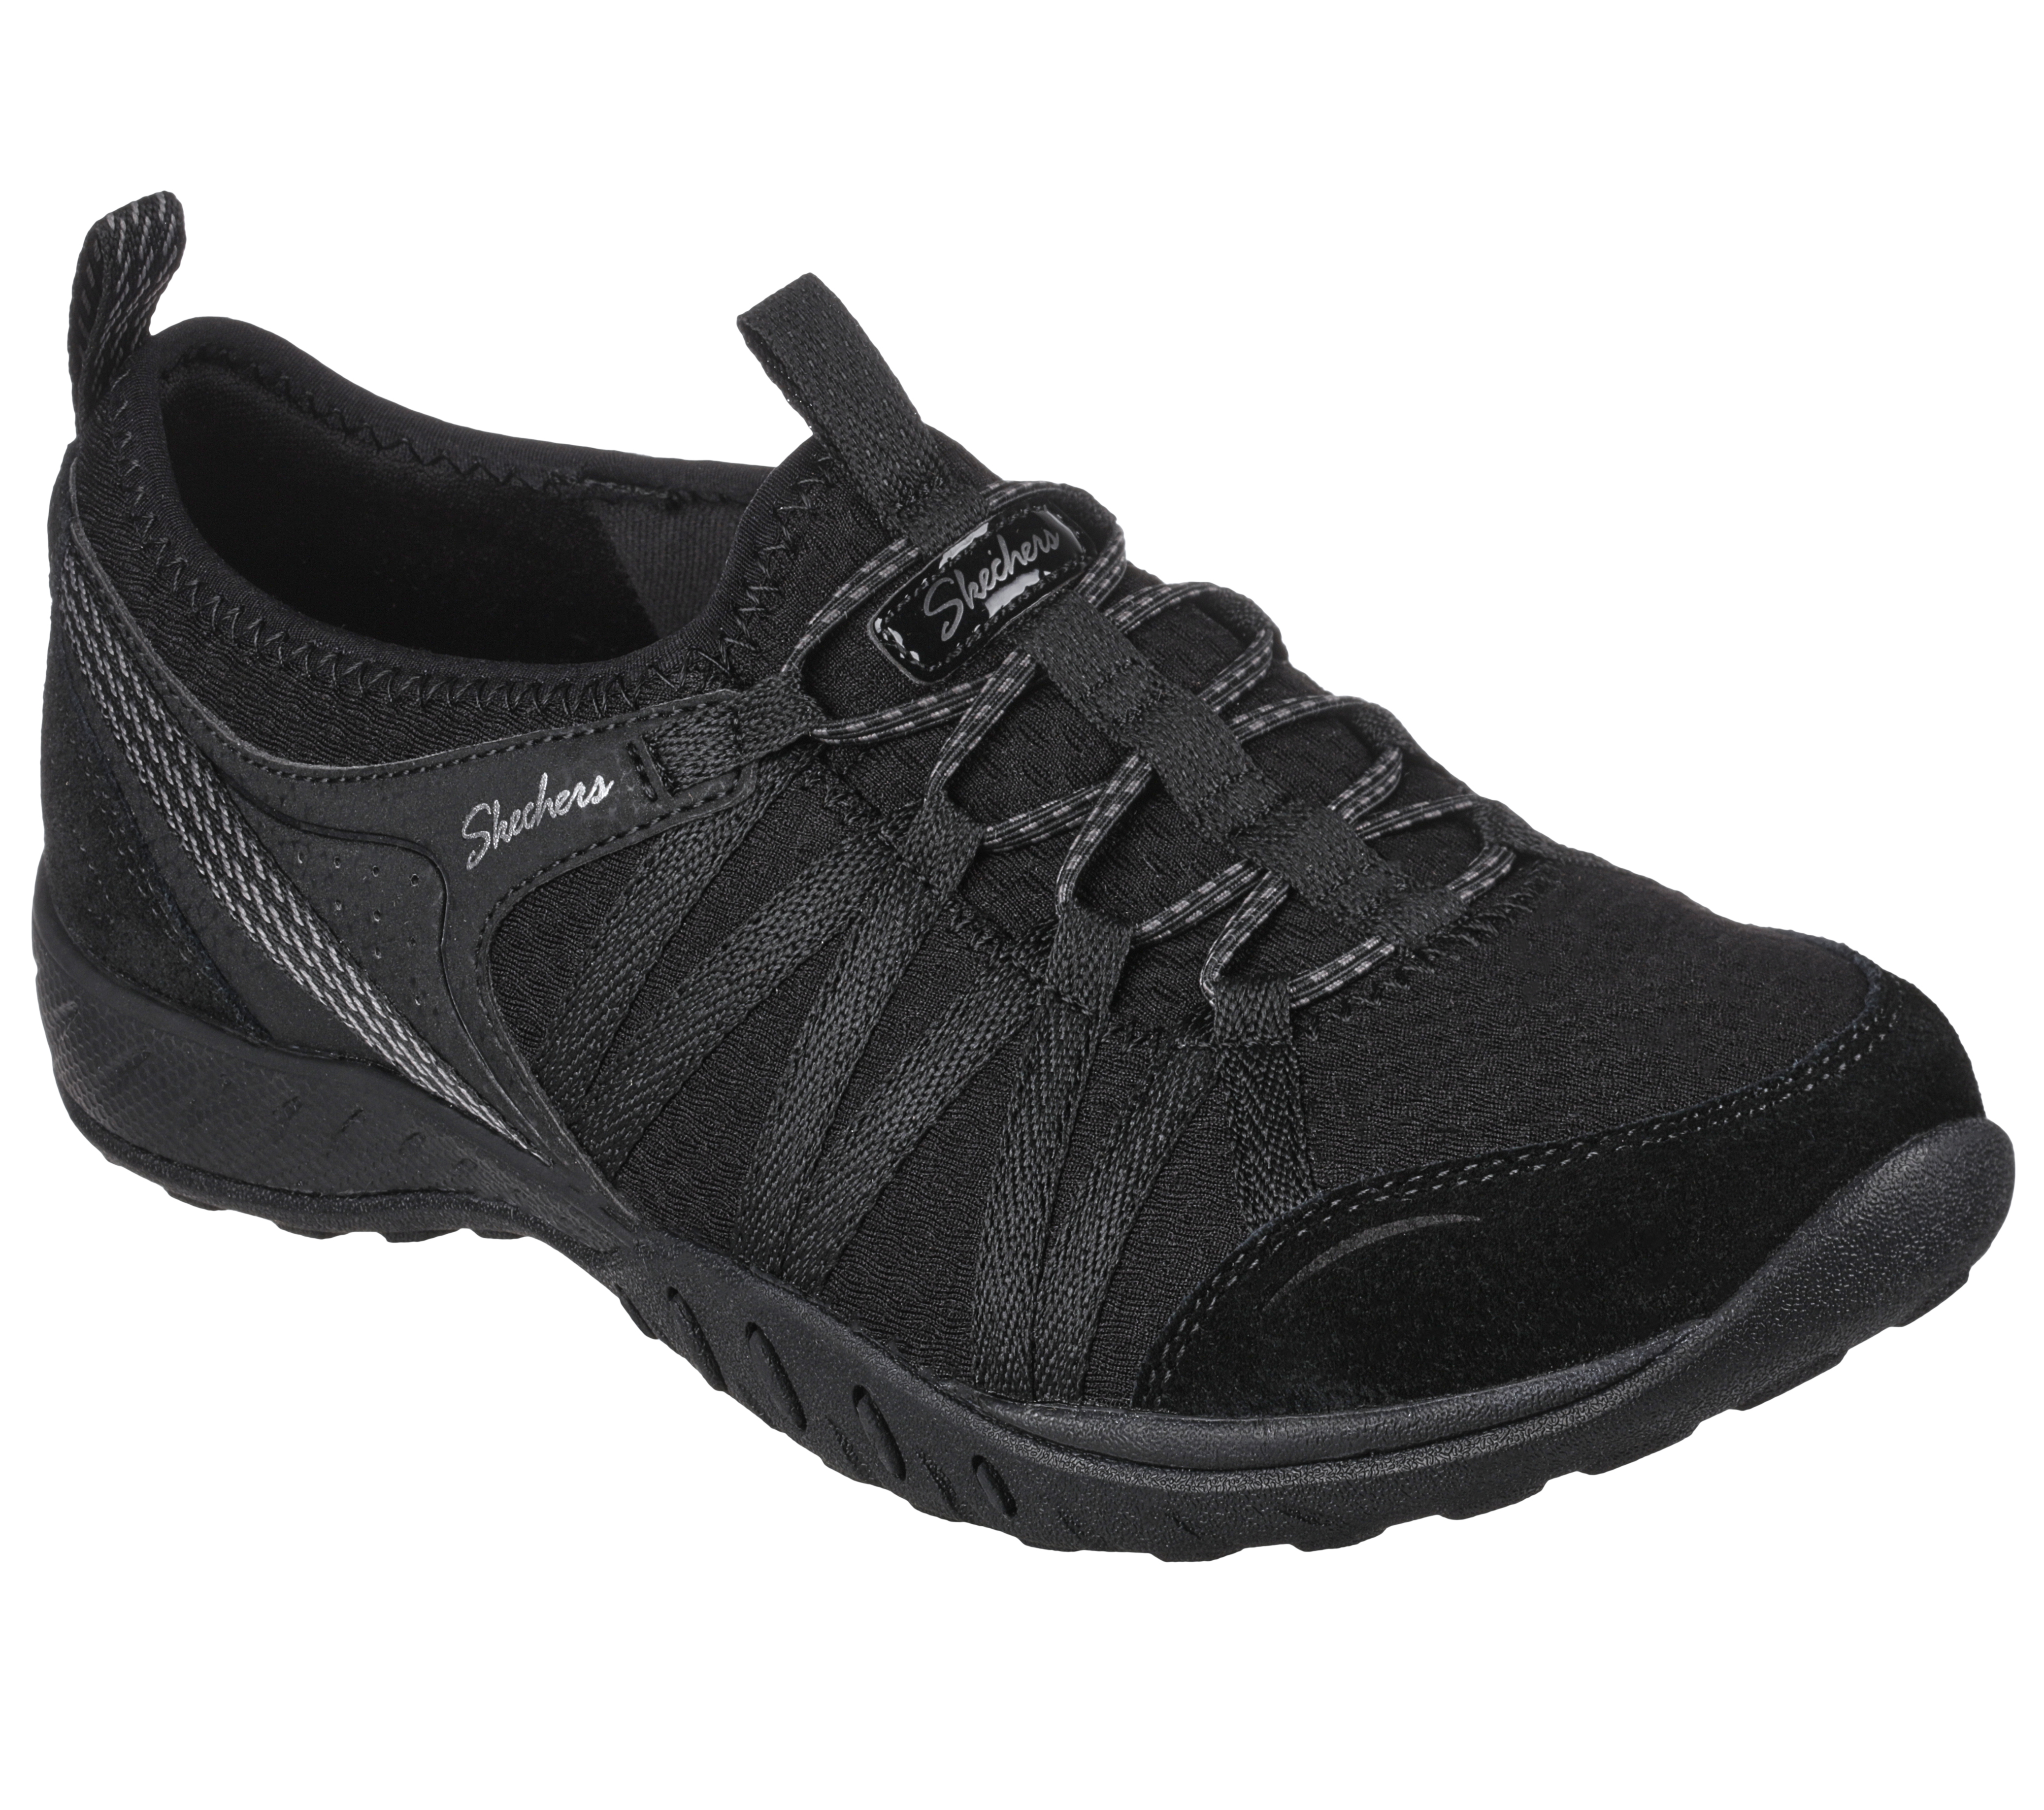 Foto de producto: Relaxed fit: breathe-easy rugged